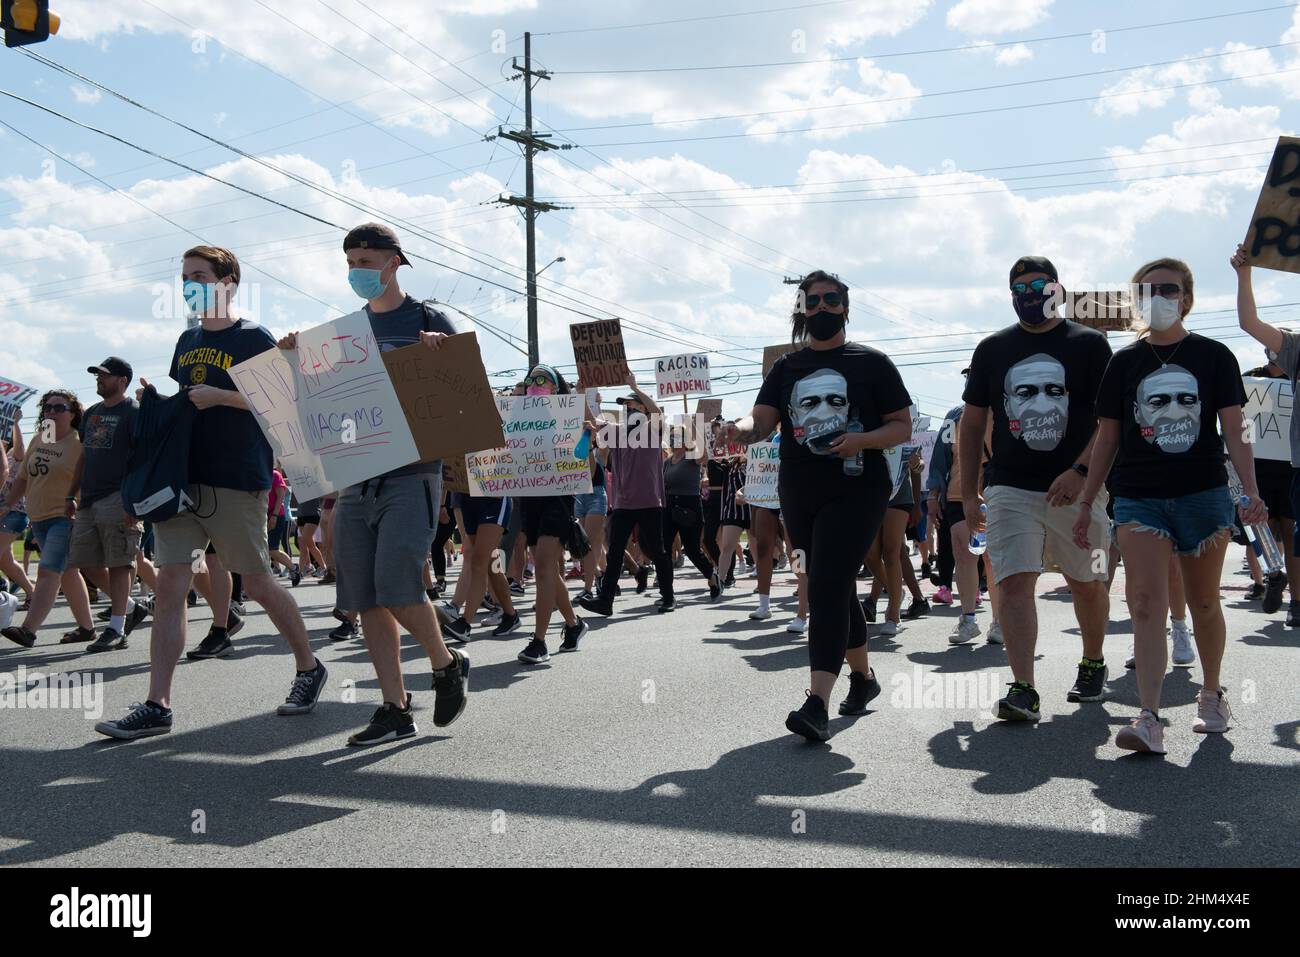 Three of the many people marching in the Black Lives Matter protest in Sterling Heights, Michigan, wearing matching George Floyd t-shirts. Stock Photo